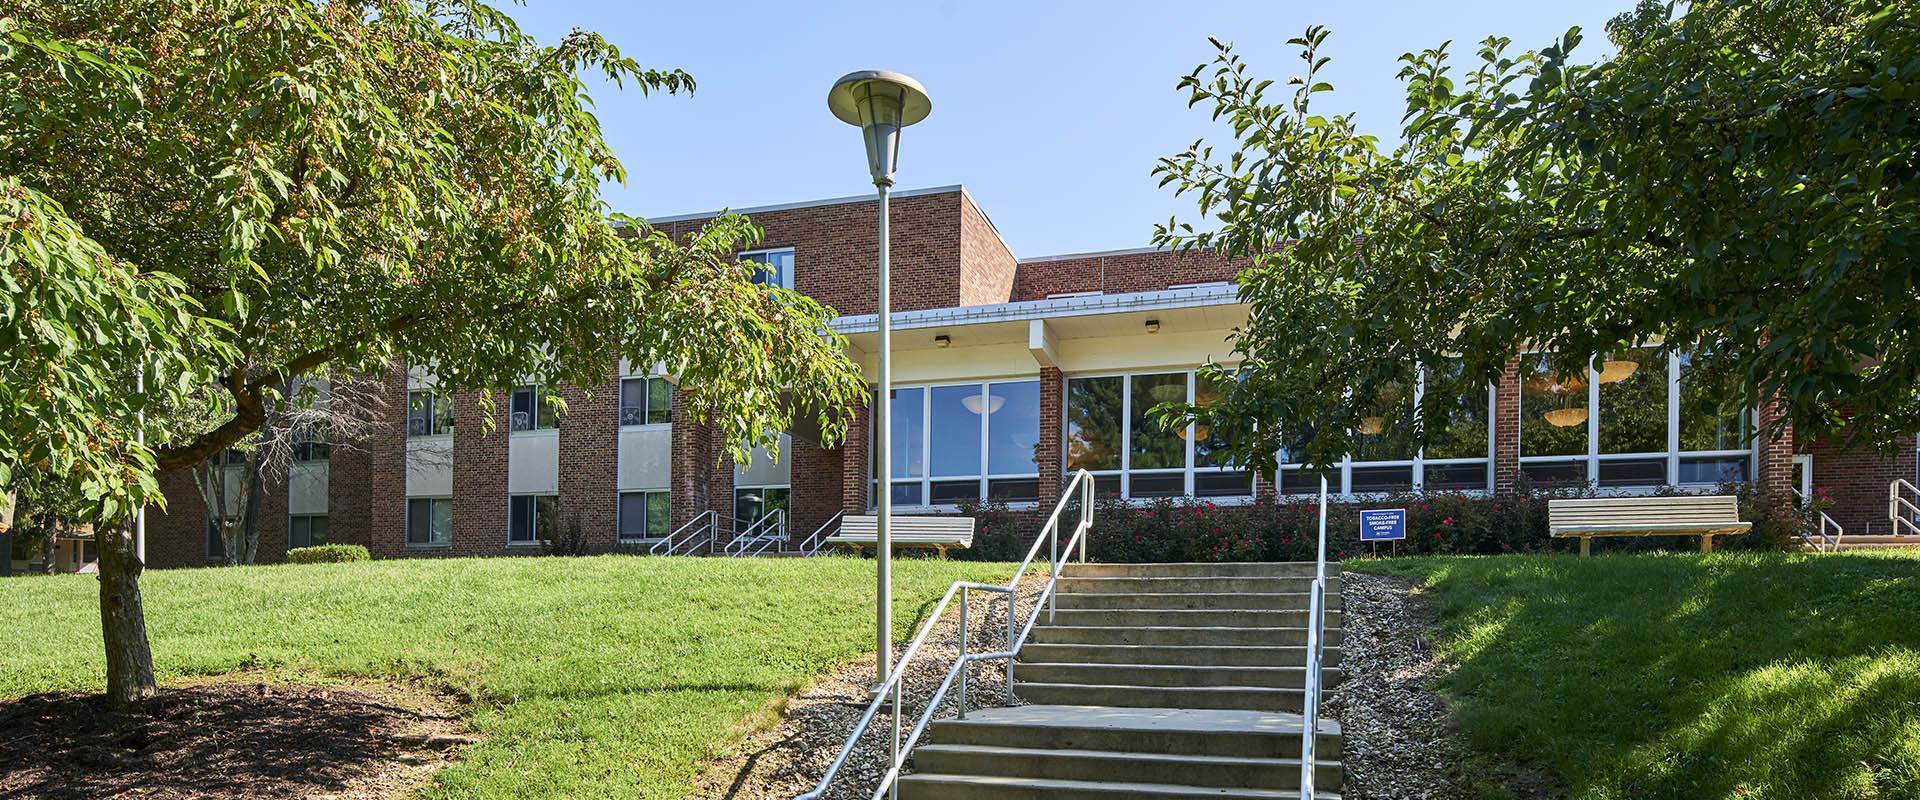 Front of Mont Alto Hall with steps